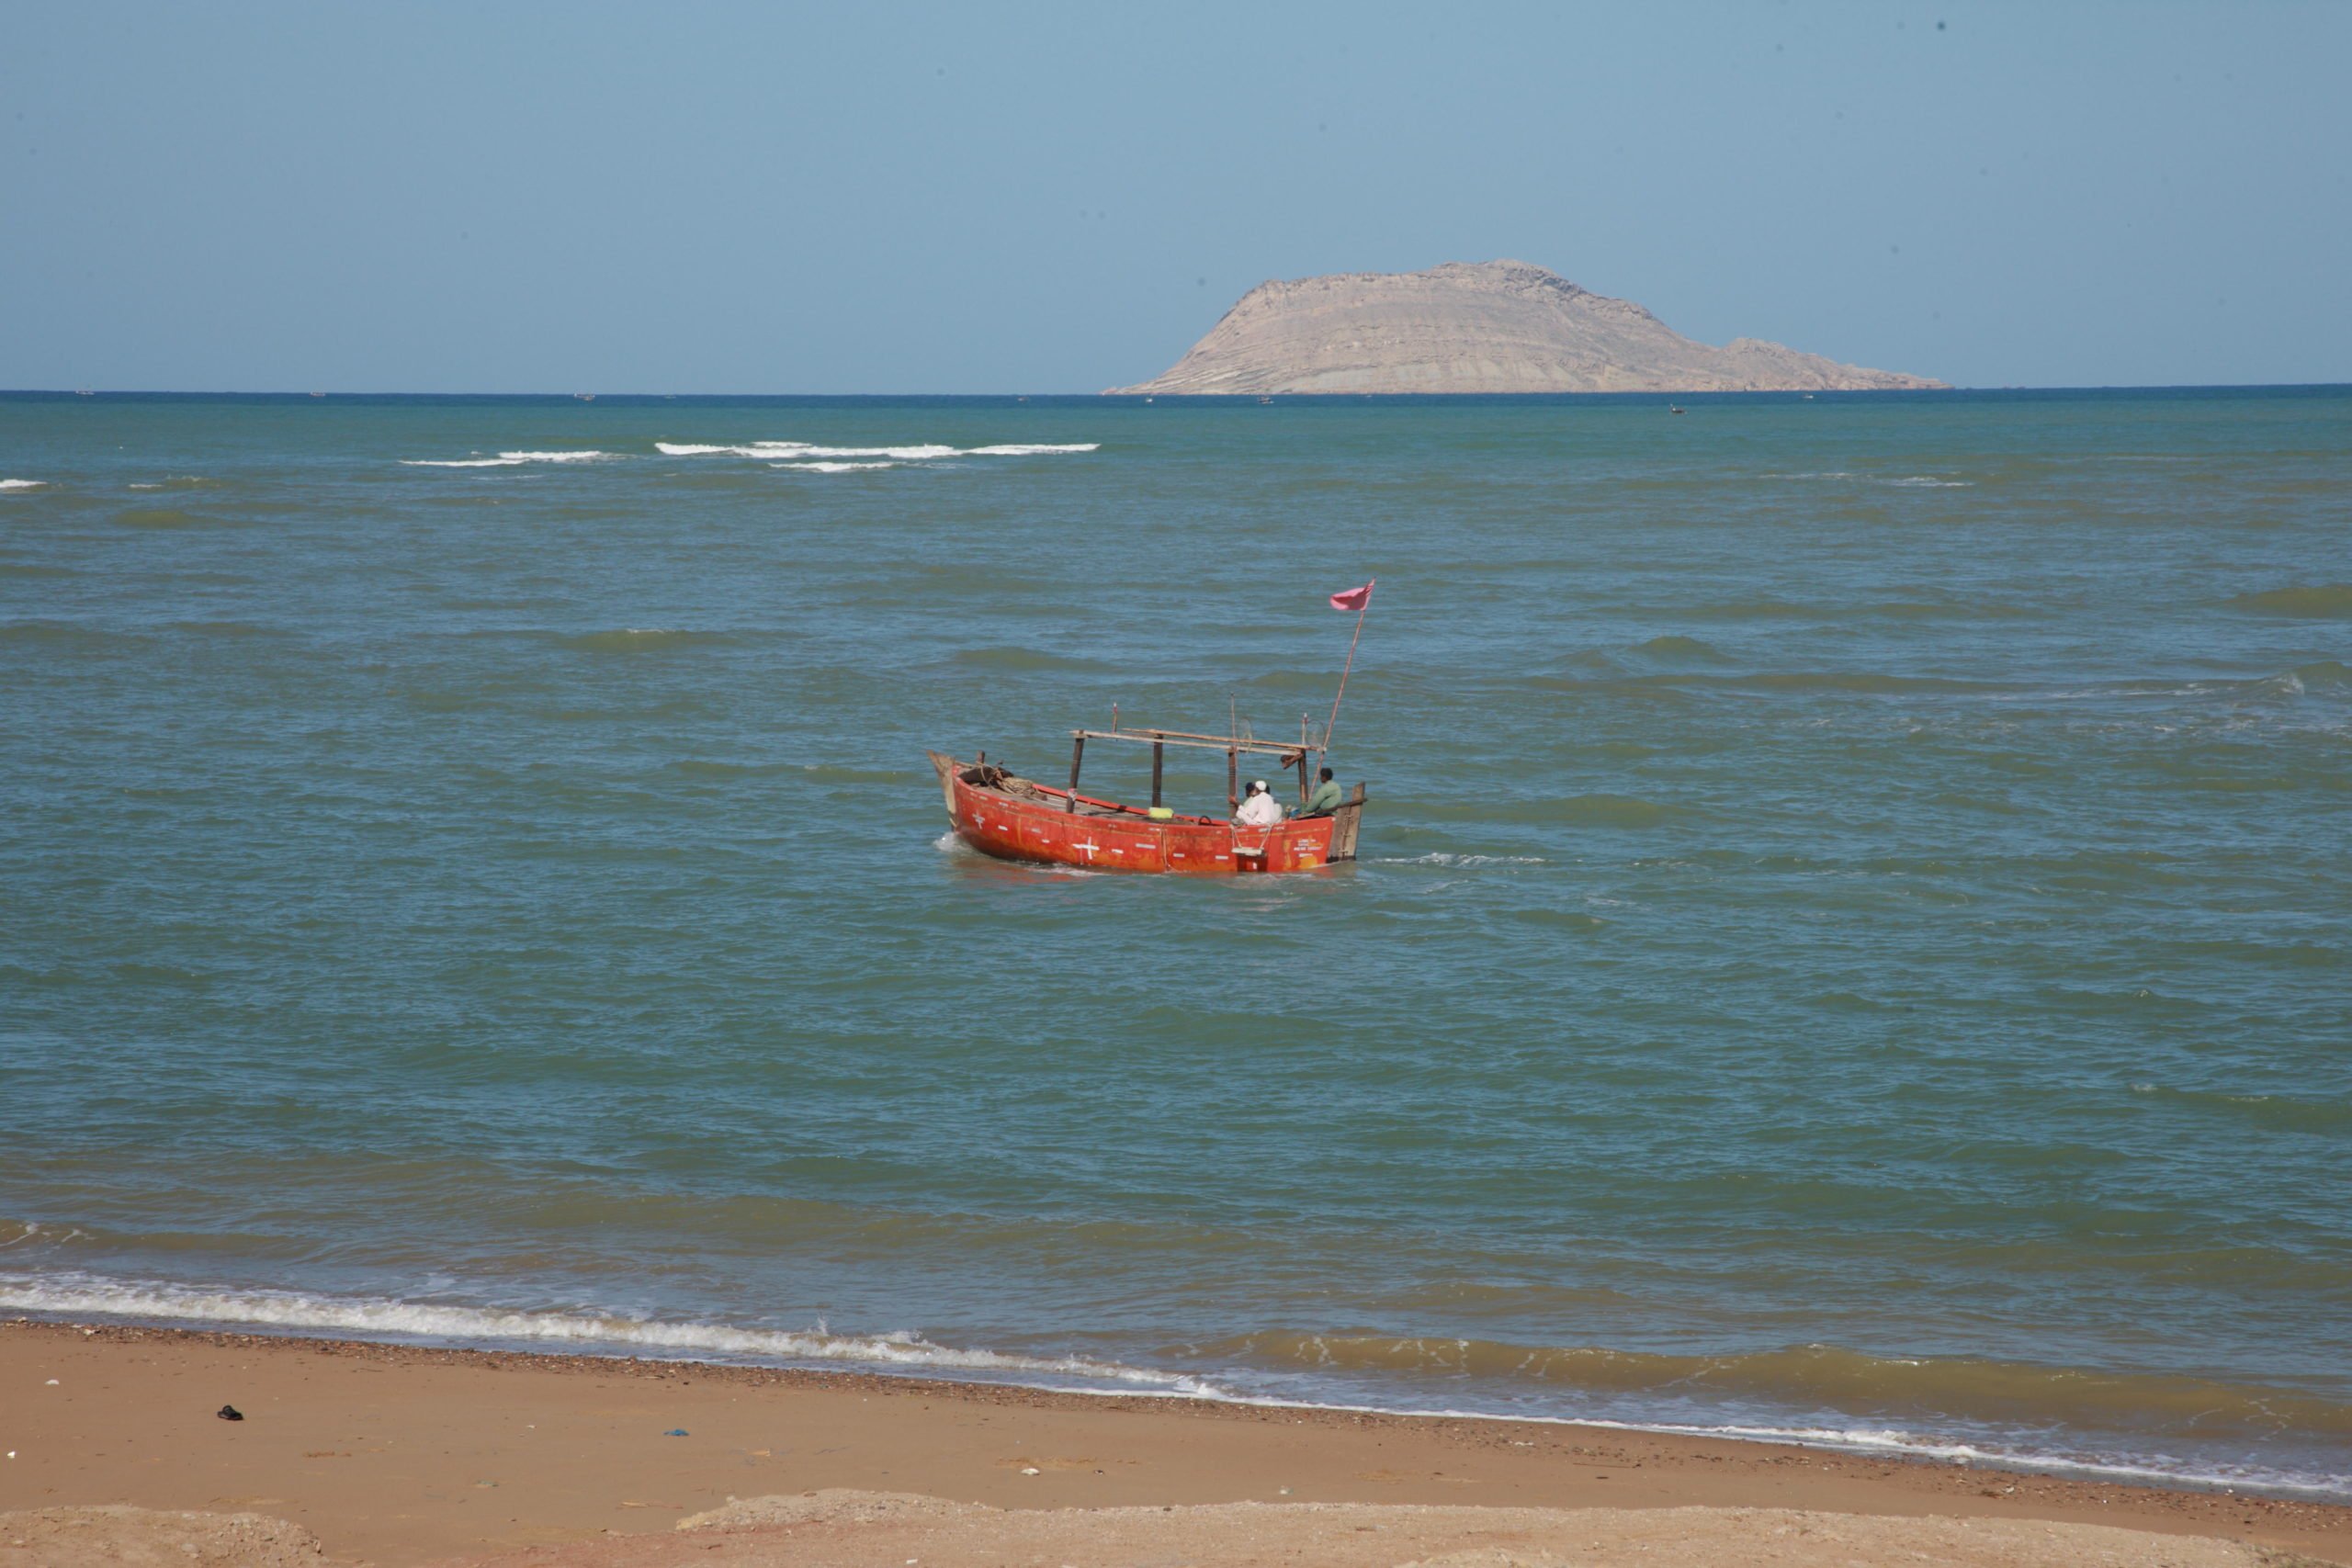 Churna Island in Pakistan, a diver's paradise, seen from Sunehra beach in Balochistan